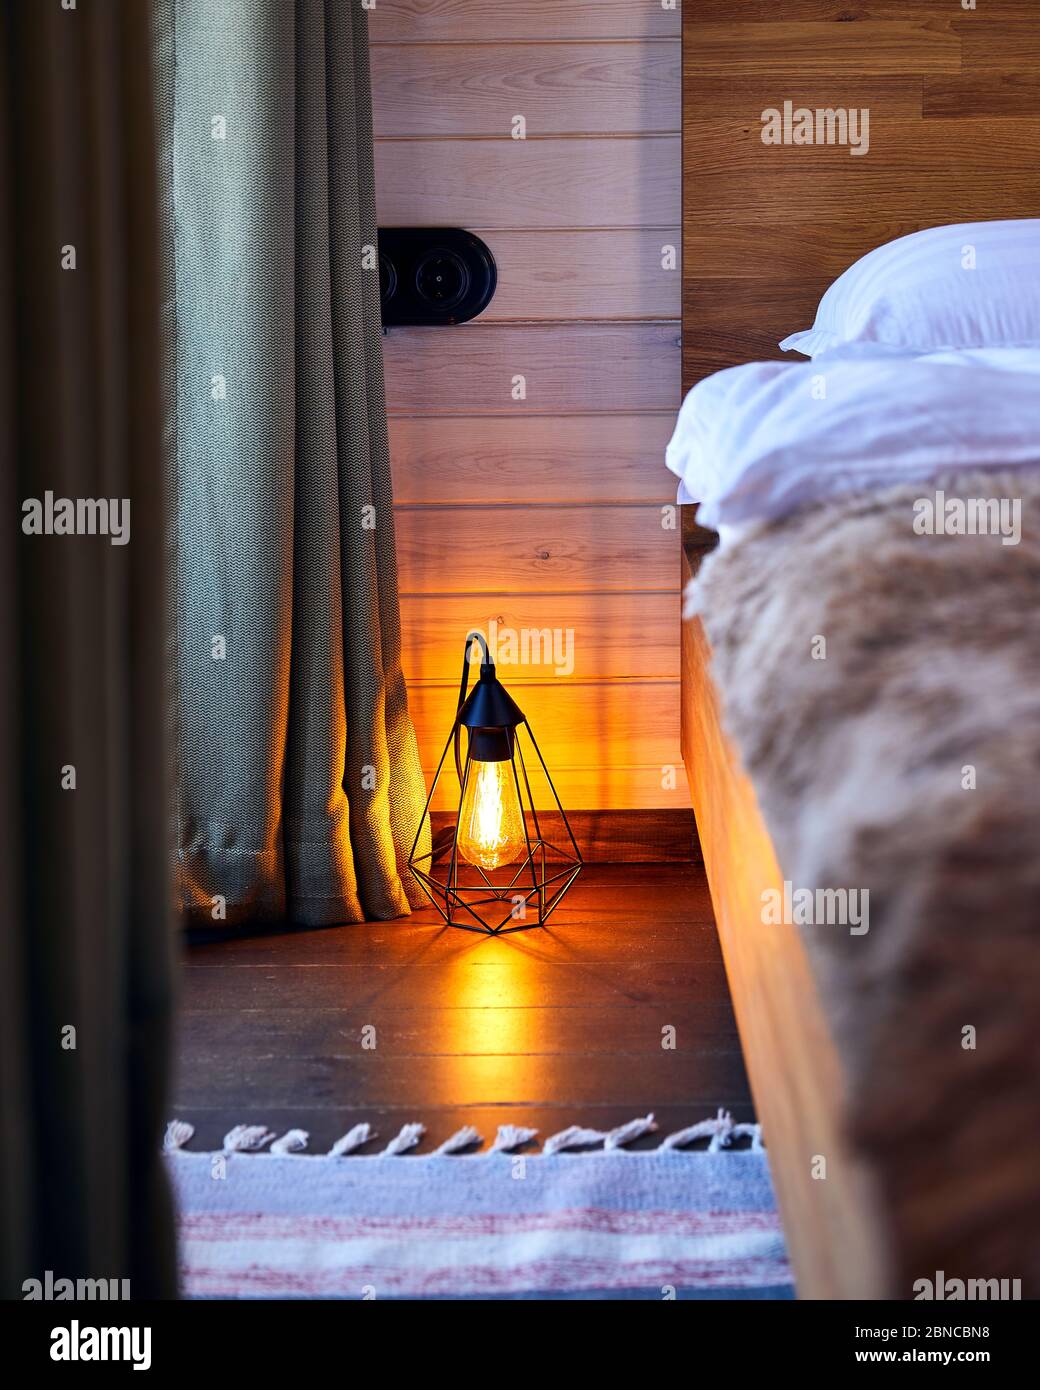 Modern interior of cozy bedroom in the hotel with glowing loft lamp on the wooden floor Stock Photo